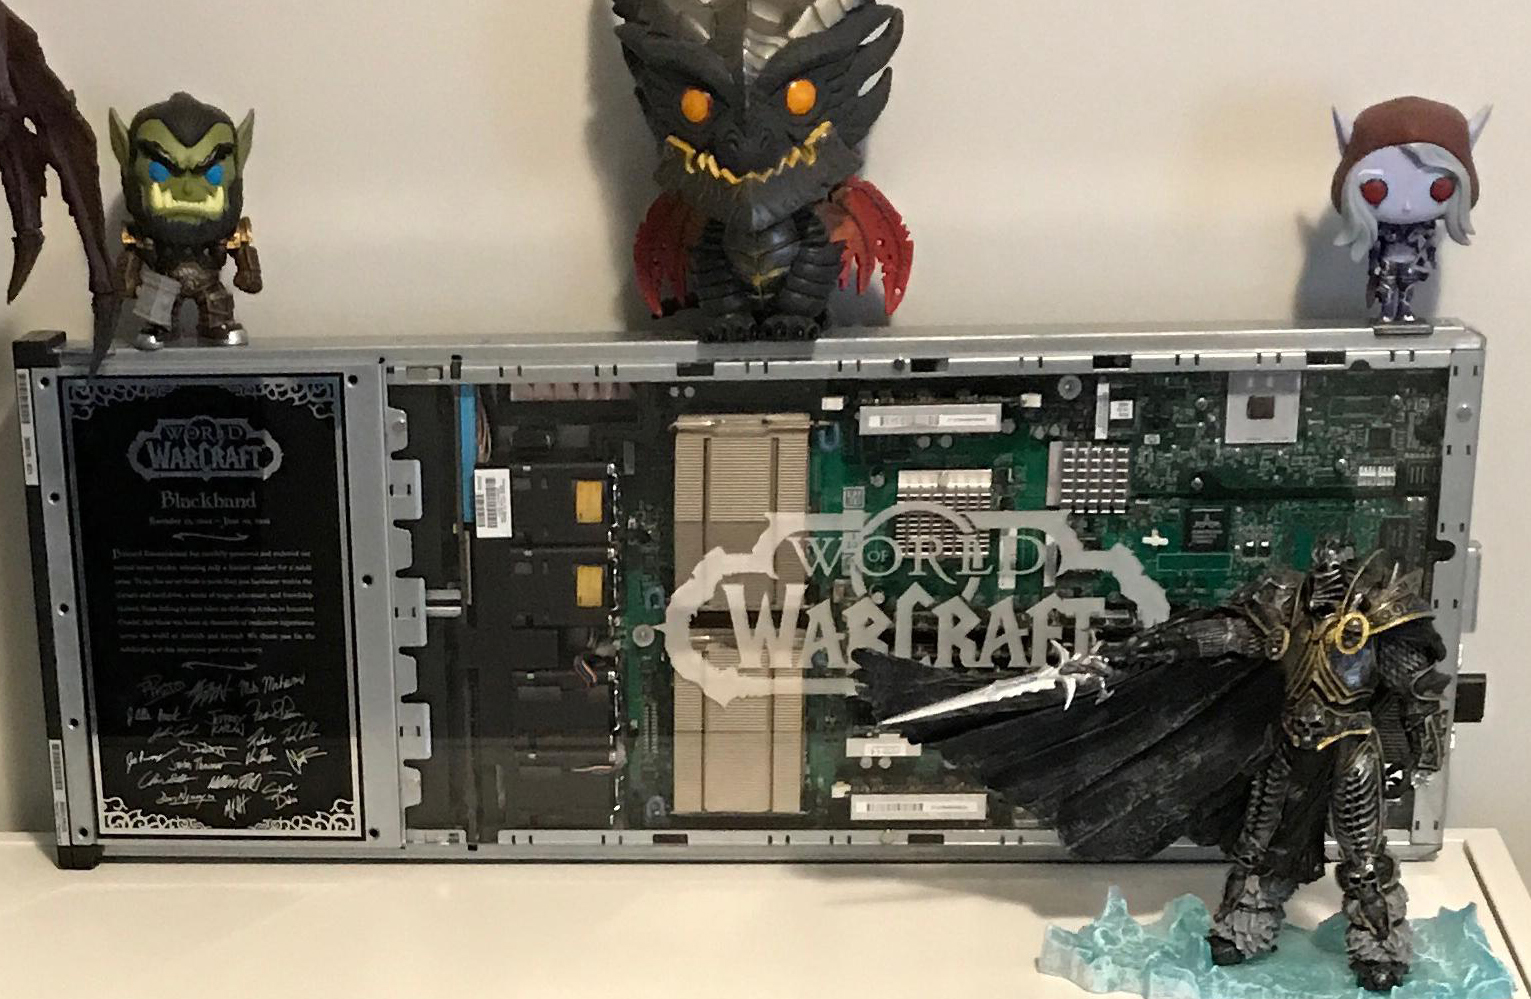 These players loved their WoW servers so much, they bought the old hardware